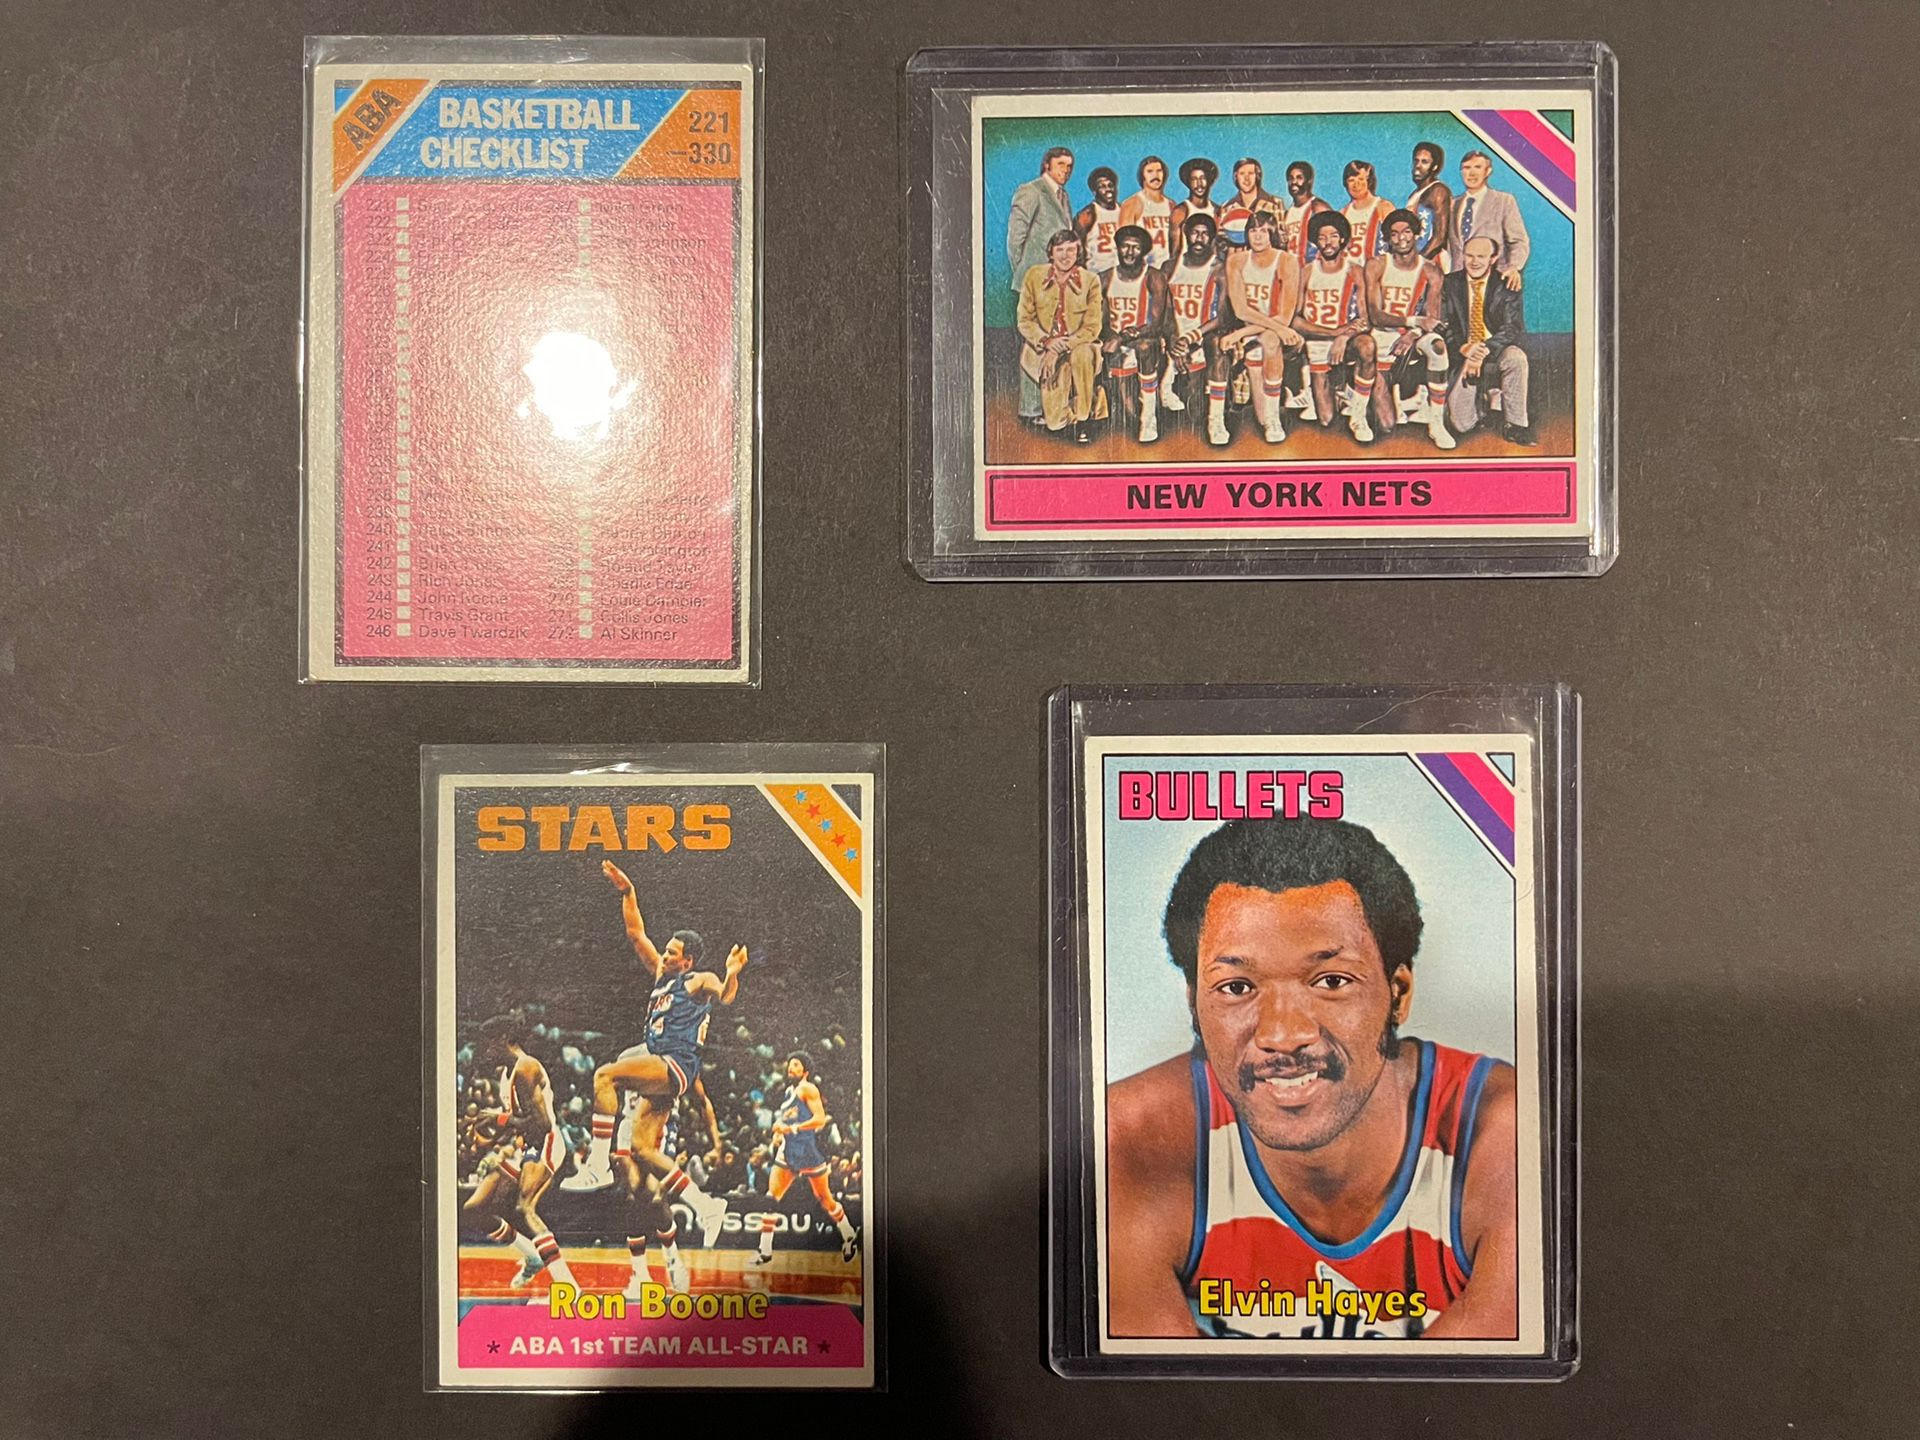 (4) 1975 Topps Basketball Cards ABA checklist #257, New York Nets Checklist #325, Ron Boone AS #235, Elvin Hayes #60 EX-MT